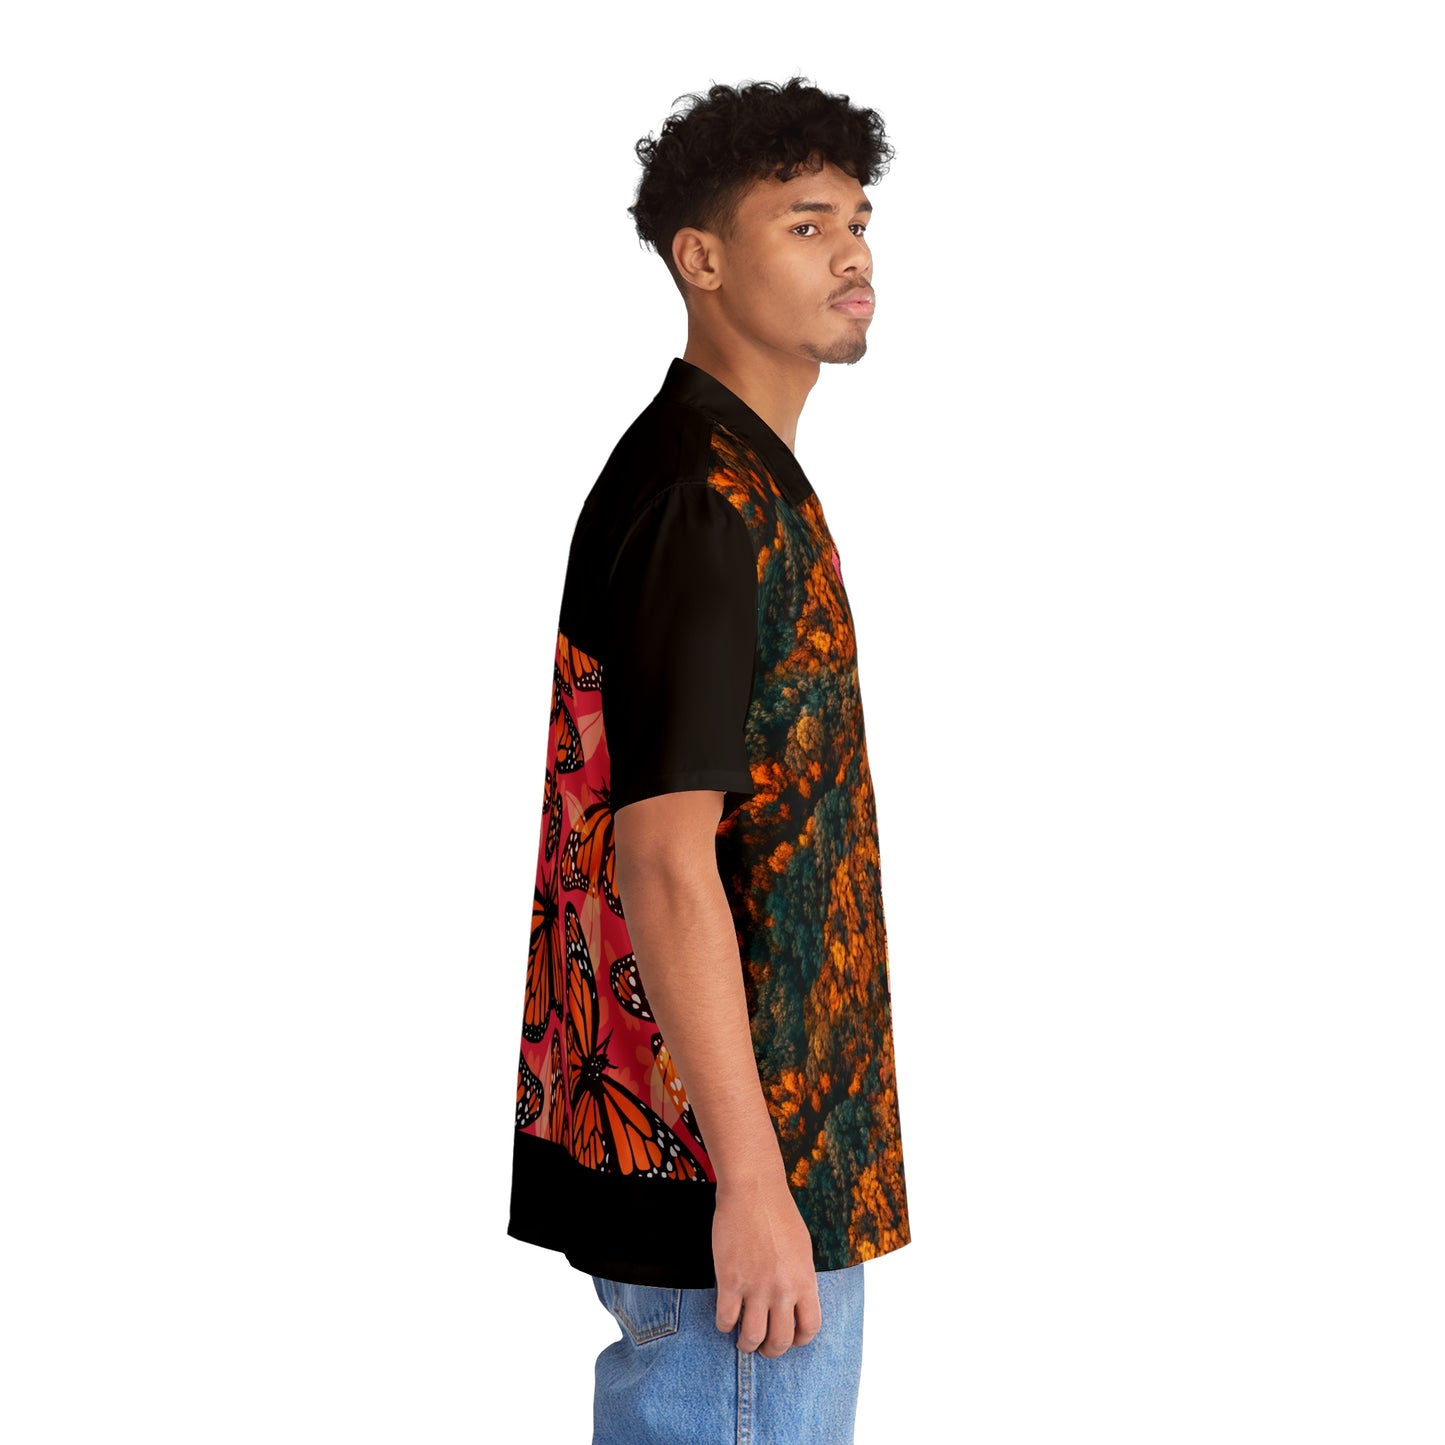 Men's Hawaiian Shirt (AOP), perfect for any laidback scenario, with a handy chest pocket, Butterfly, casual